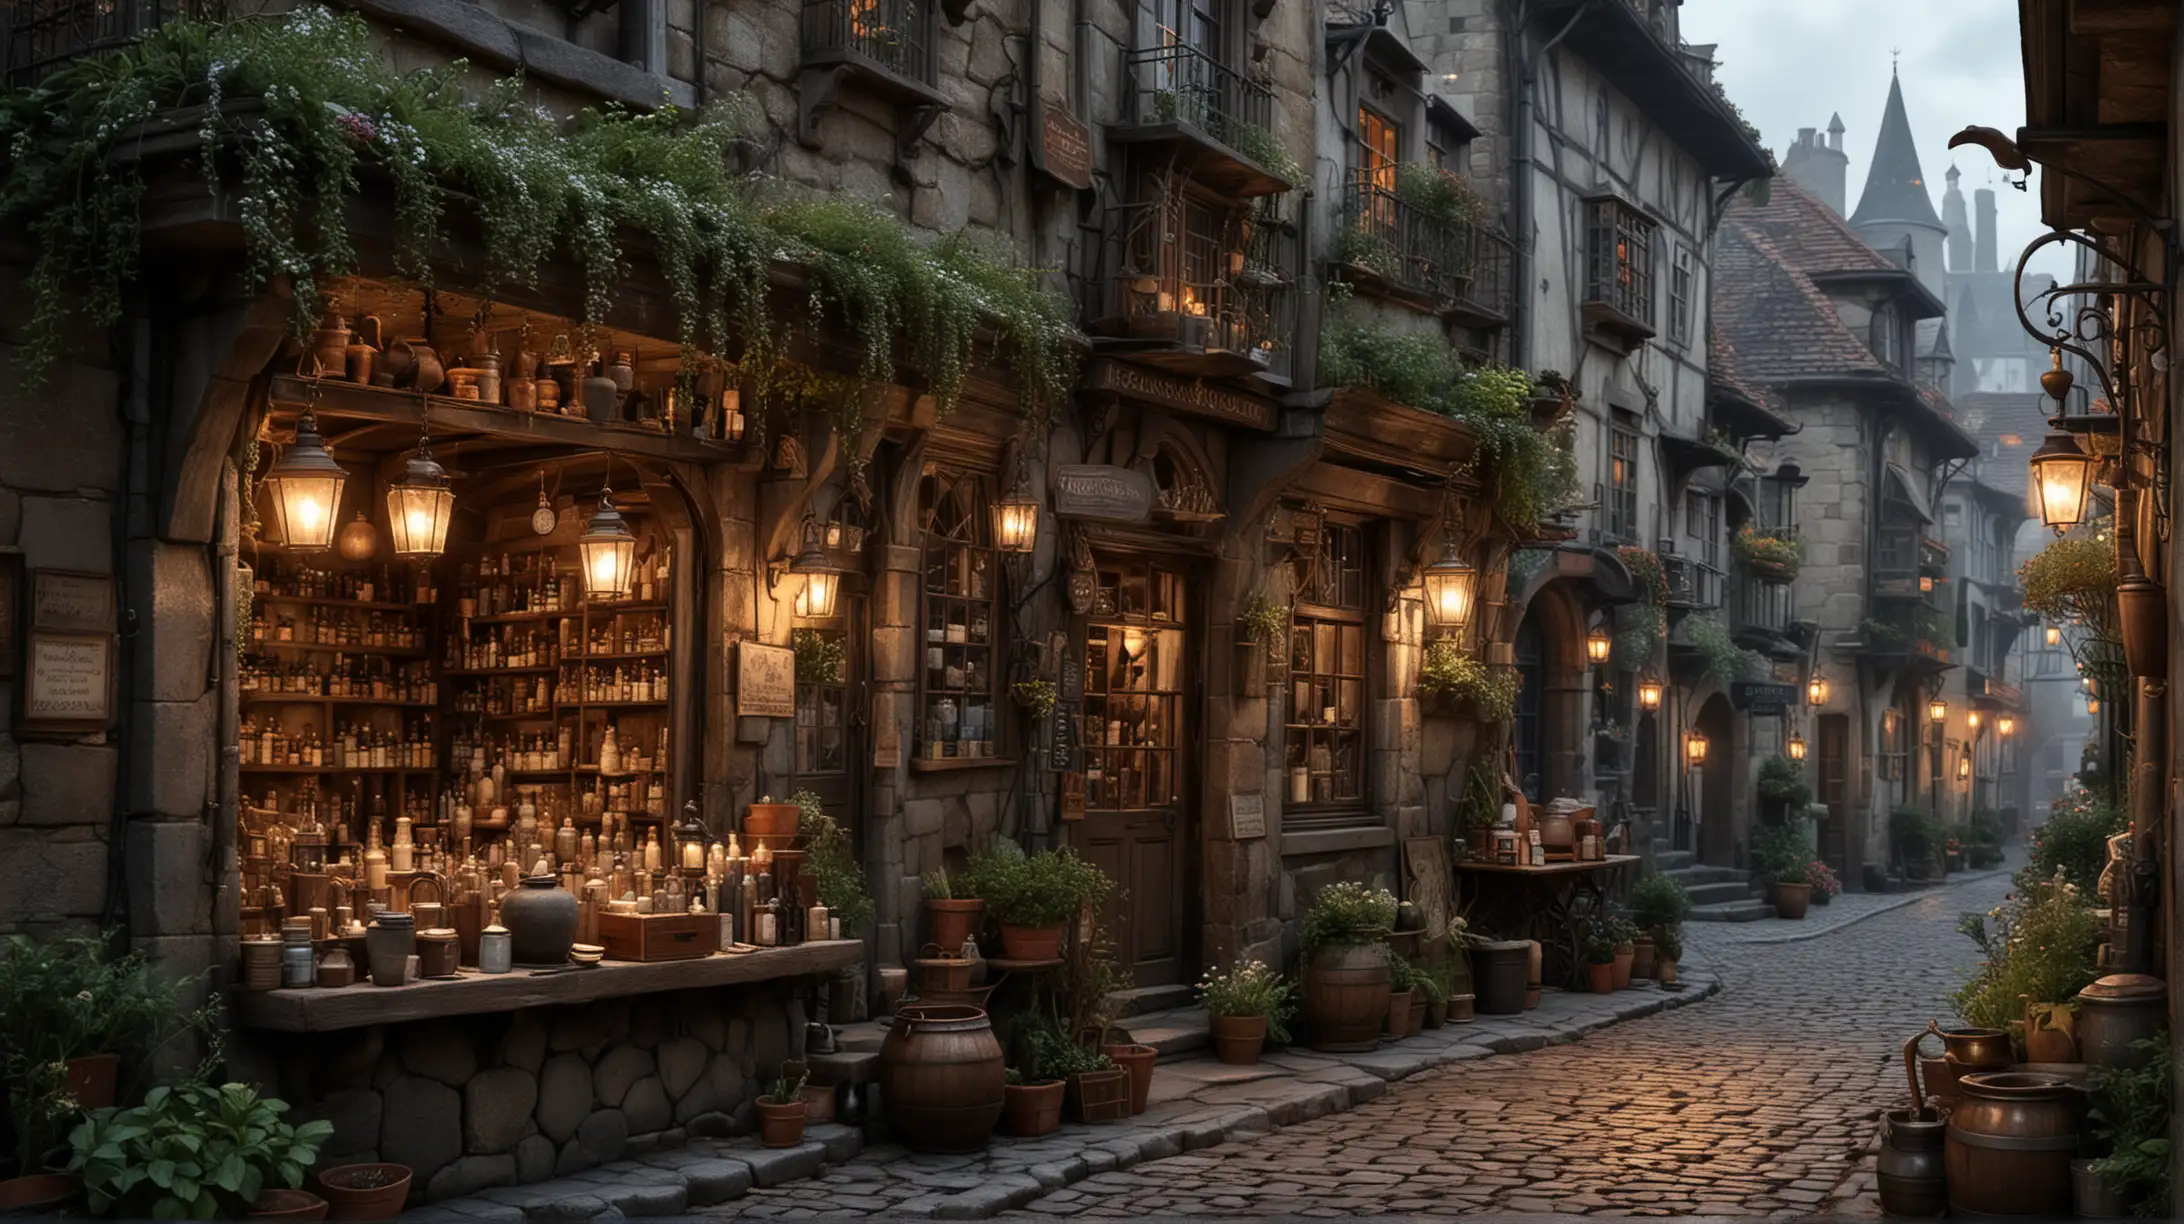 Lysandras Journey The Enchanted Apothecary in the Heart of the City